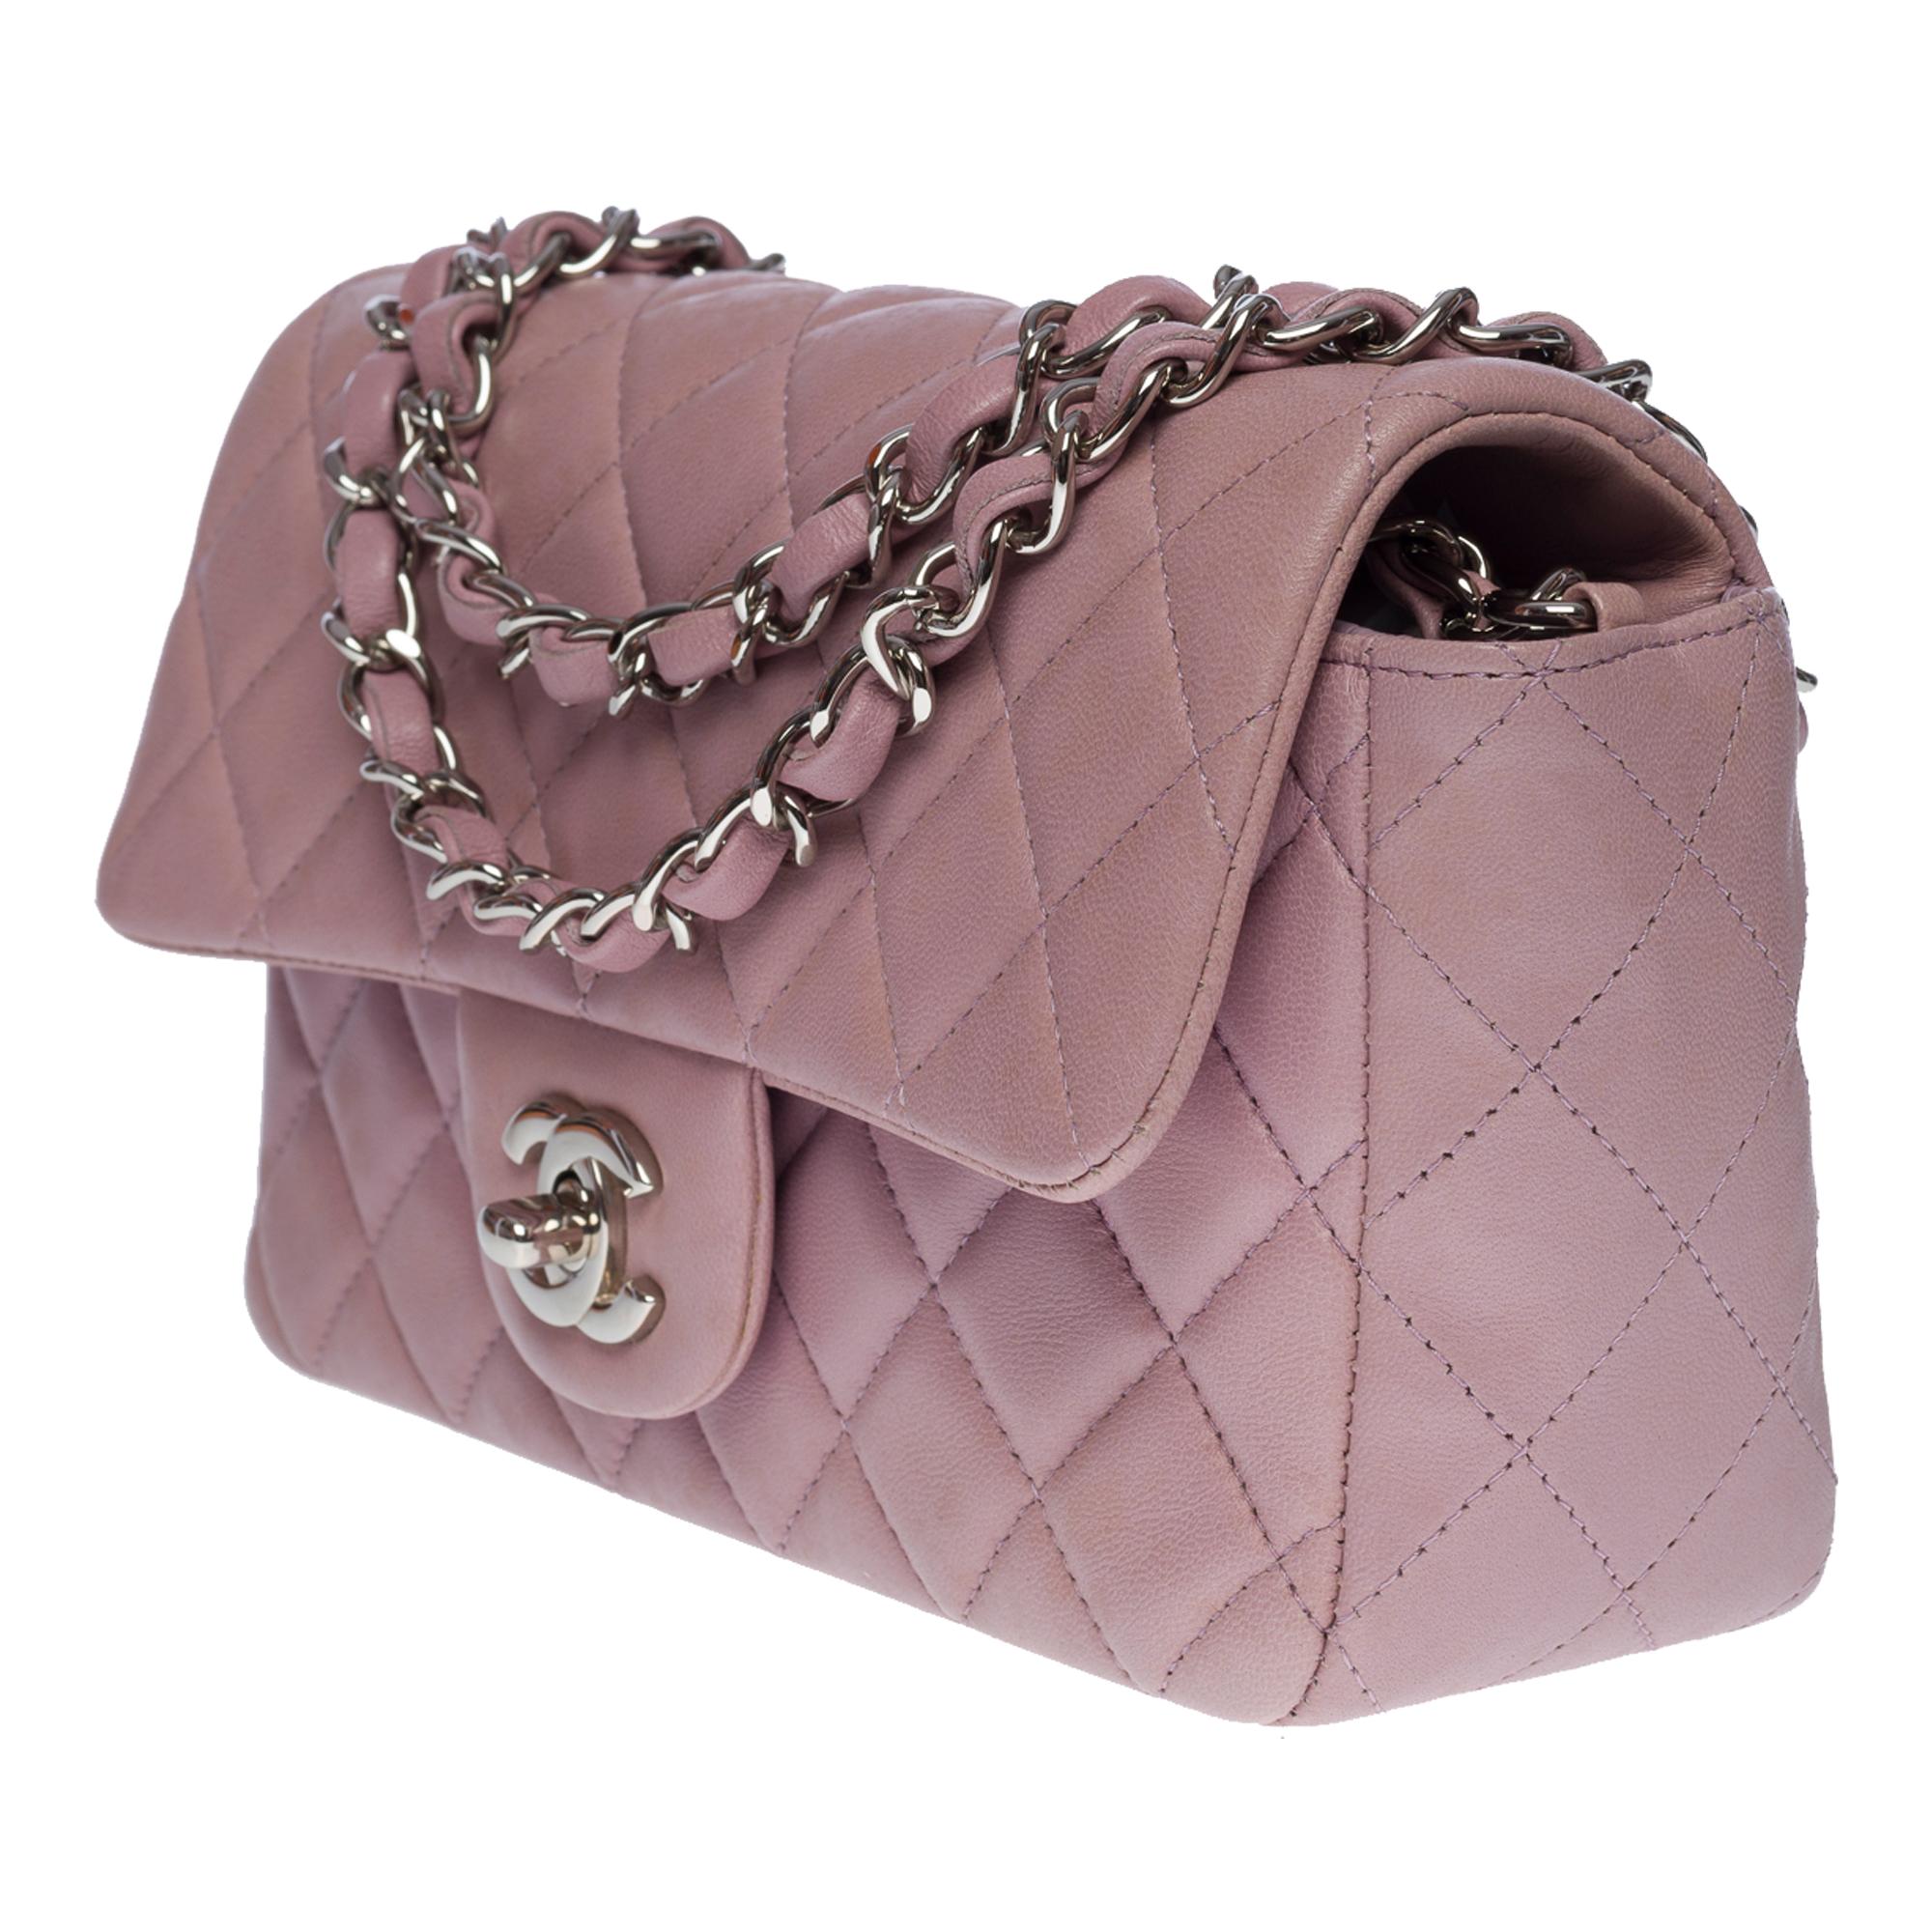 Women's Splendid Chanel Timeless Mini Flap bag in lilac quilted lambskin leather, SHW